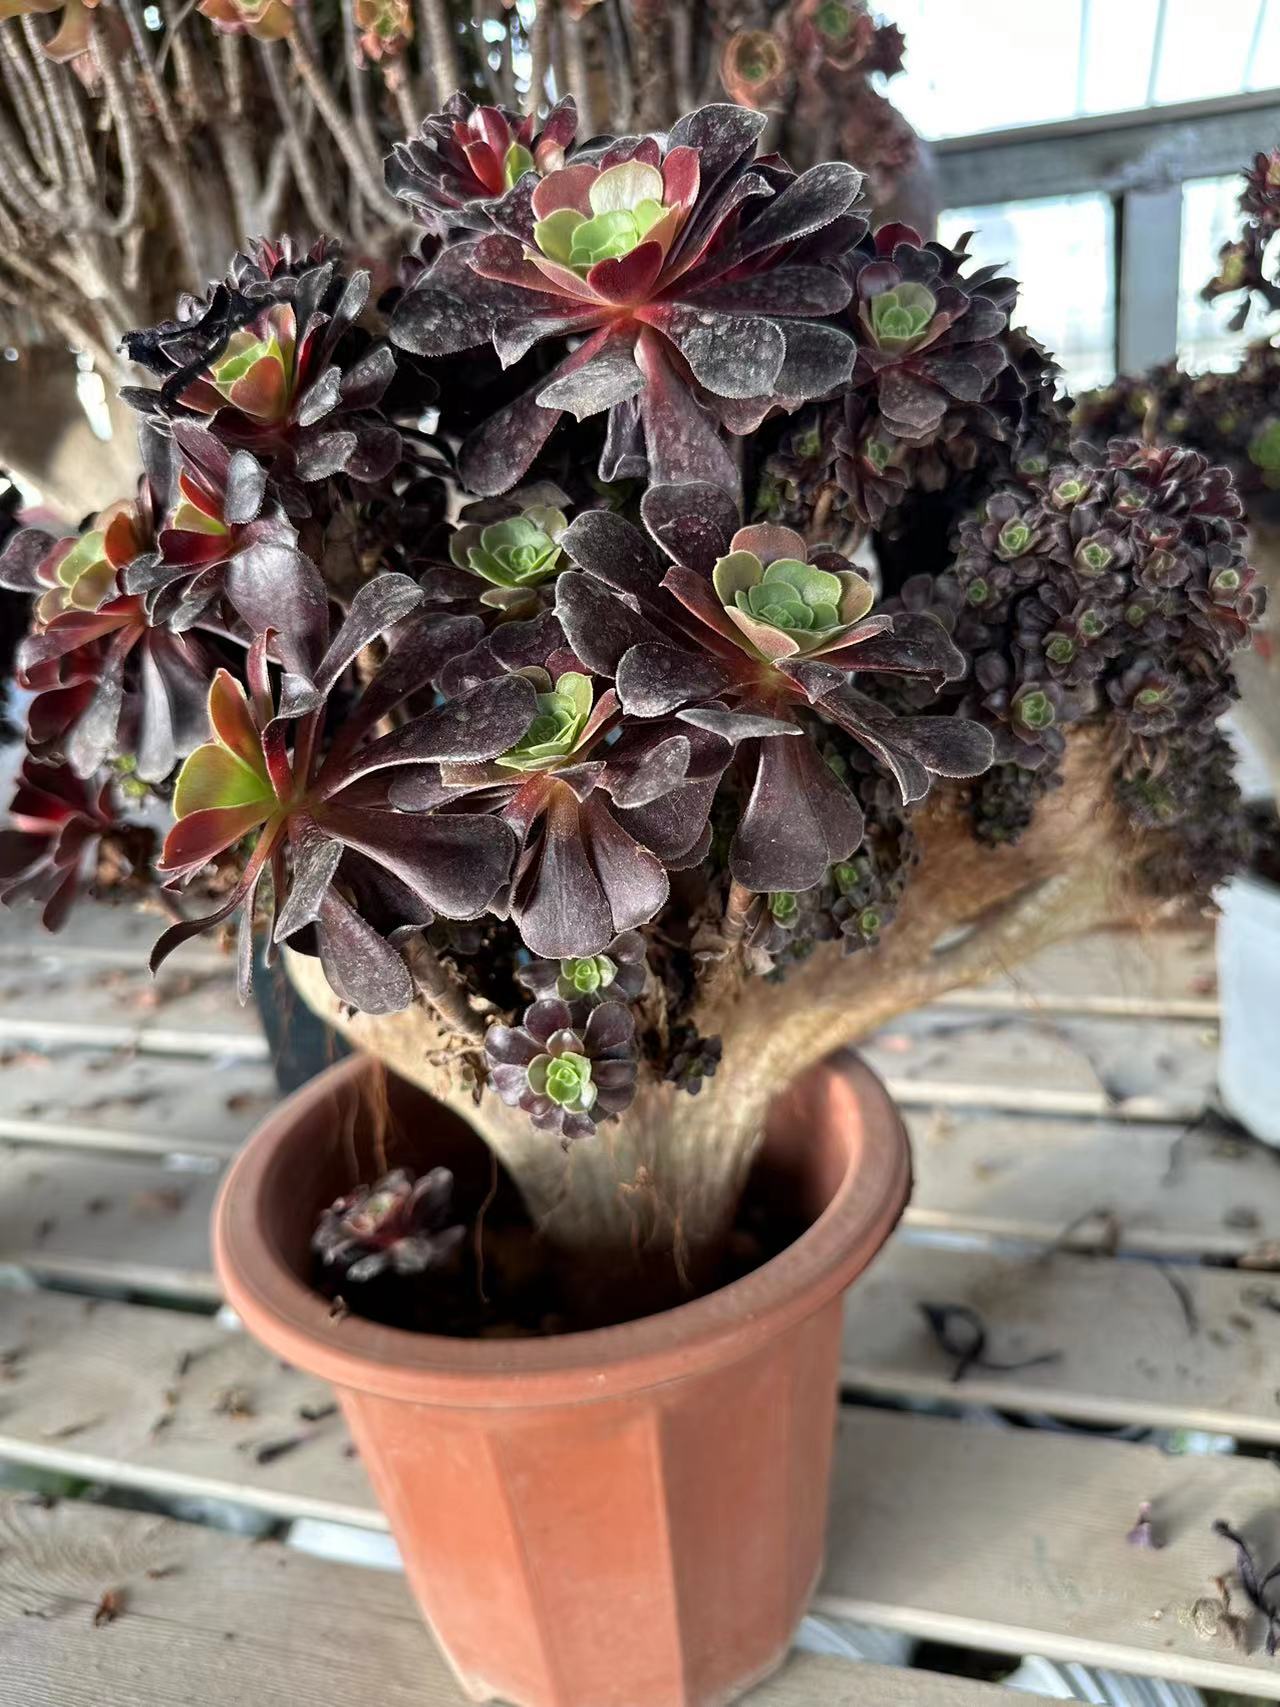 Gull purple rose buds crested high35cm/wide35cm has roots/Aeonium Affix / Variegated Natural Live Plants Succulents